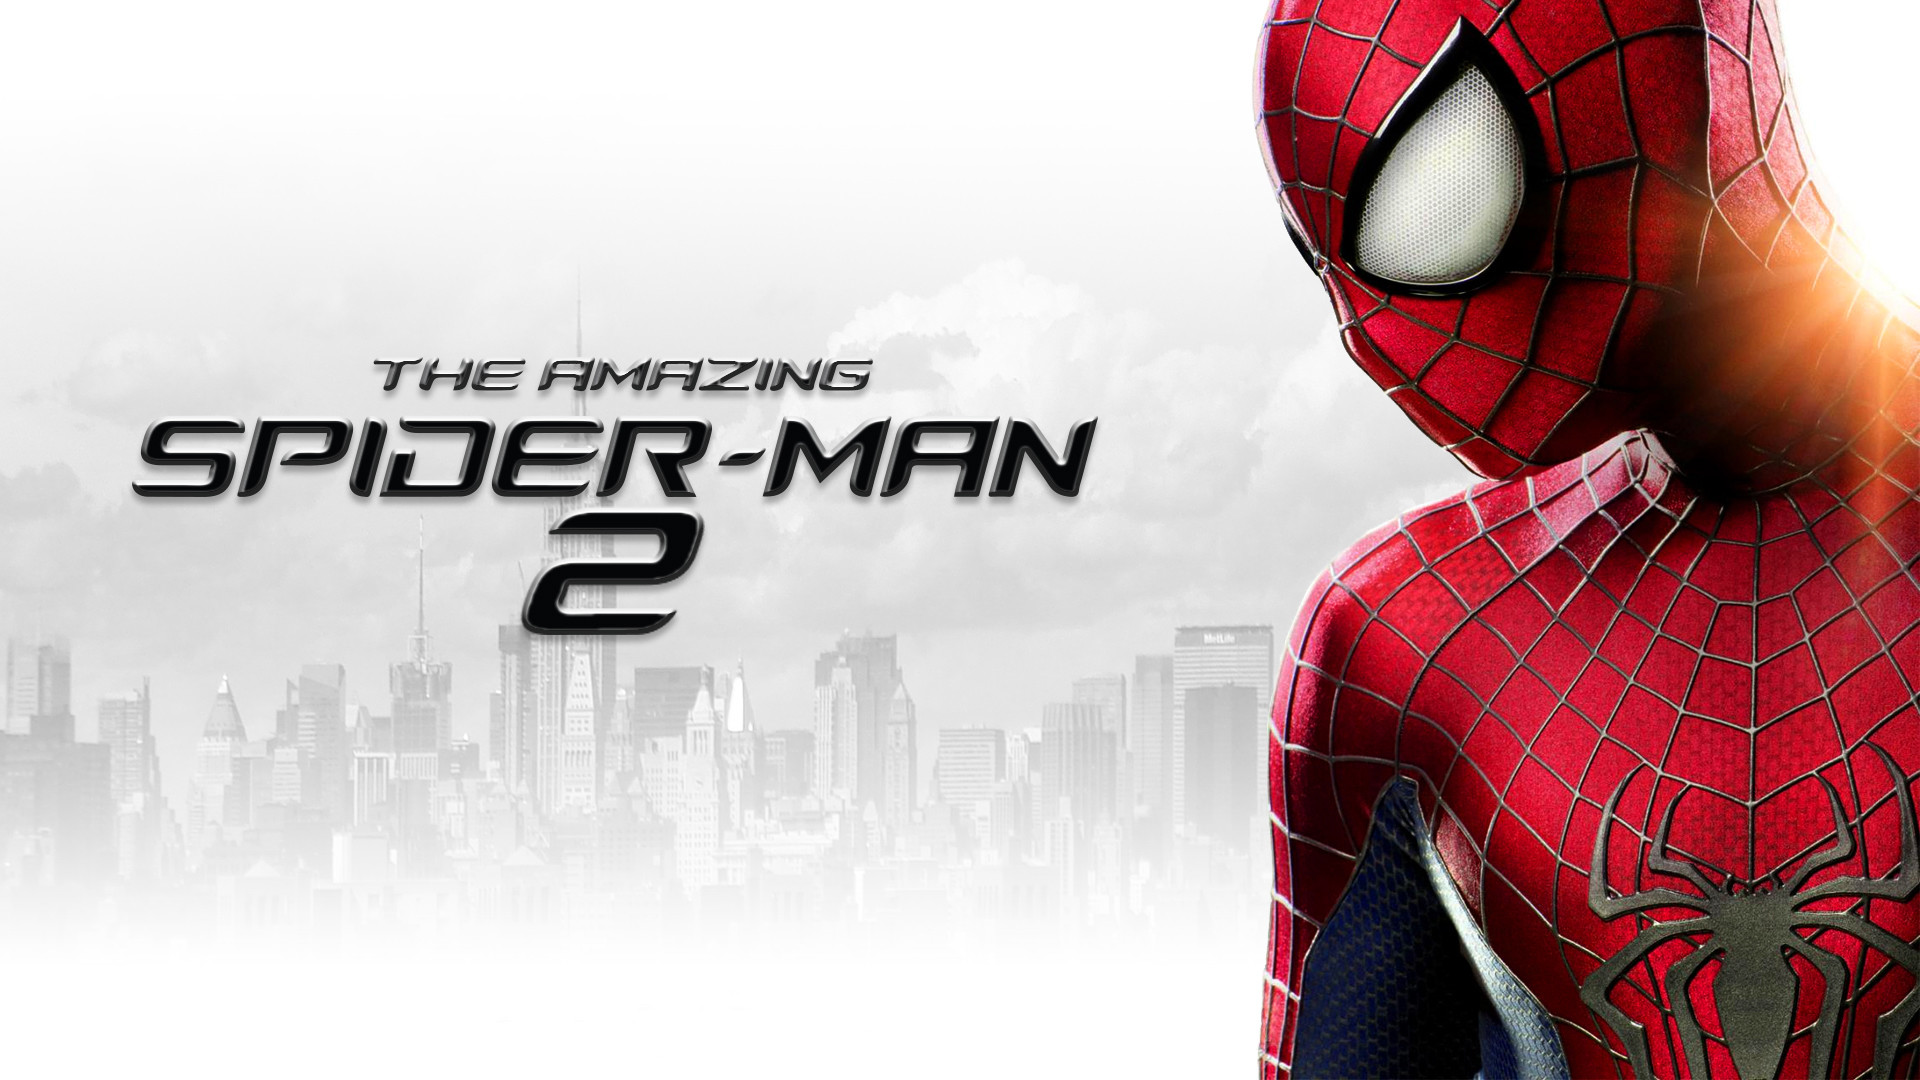 1920x1200 spiderman logo hd pc wallpapers 260 hd wallpapers site a· download